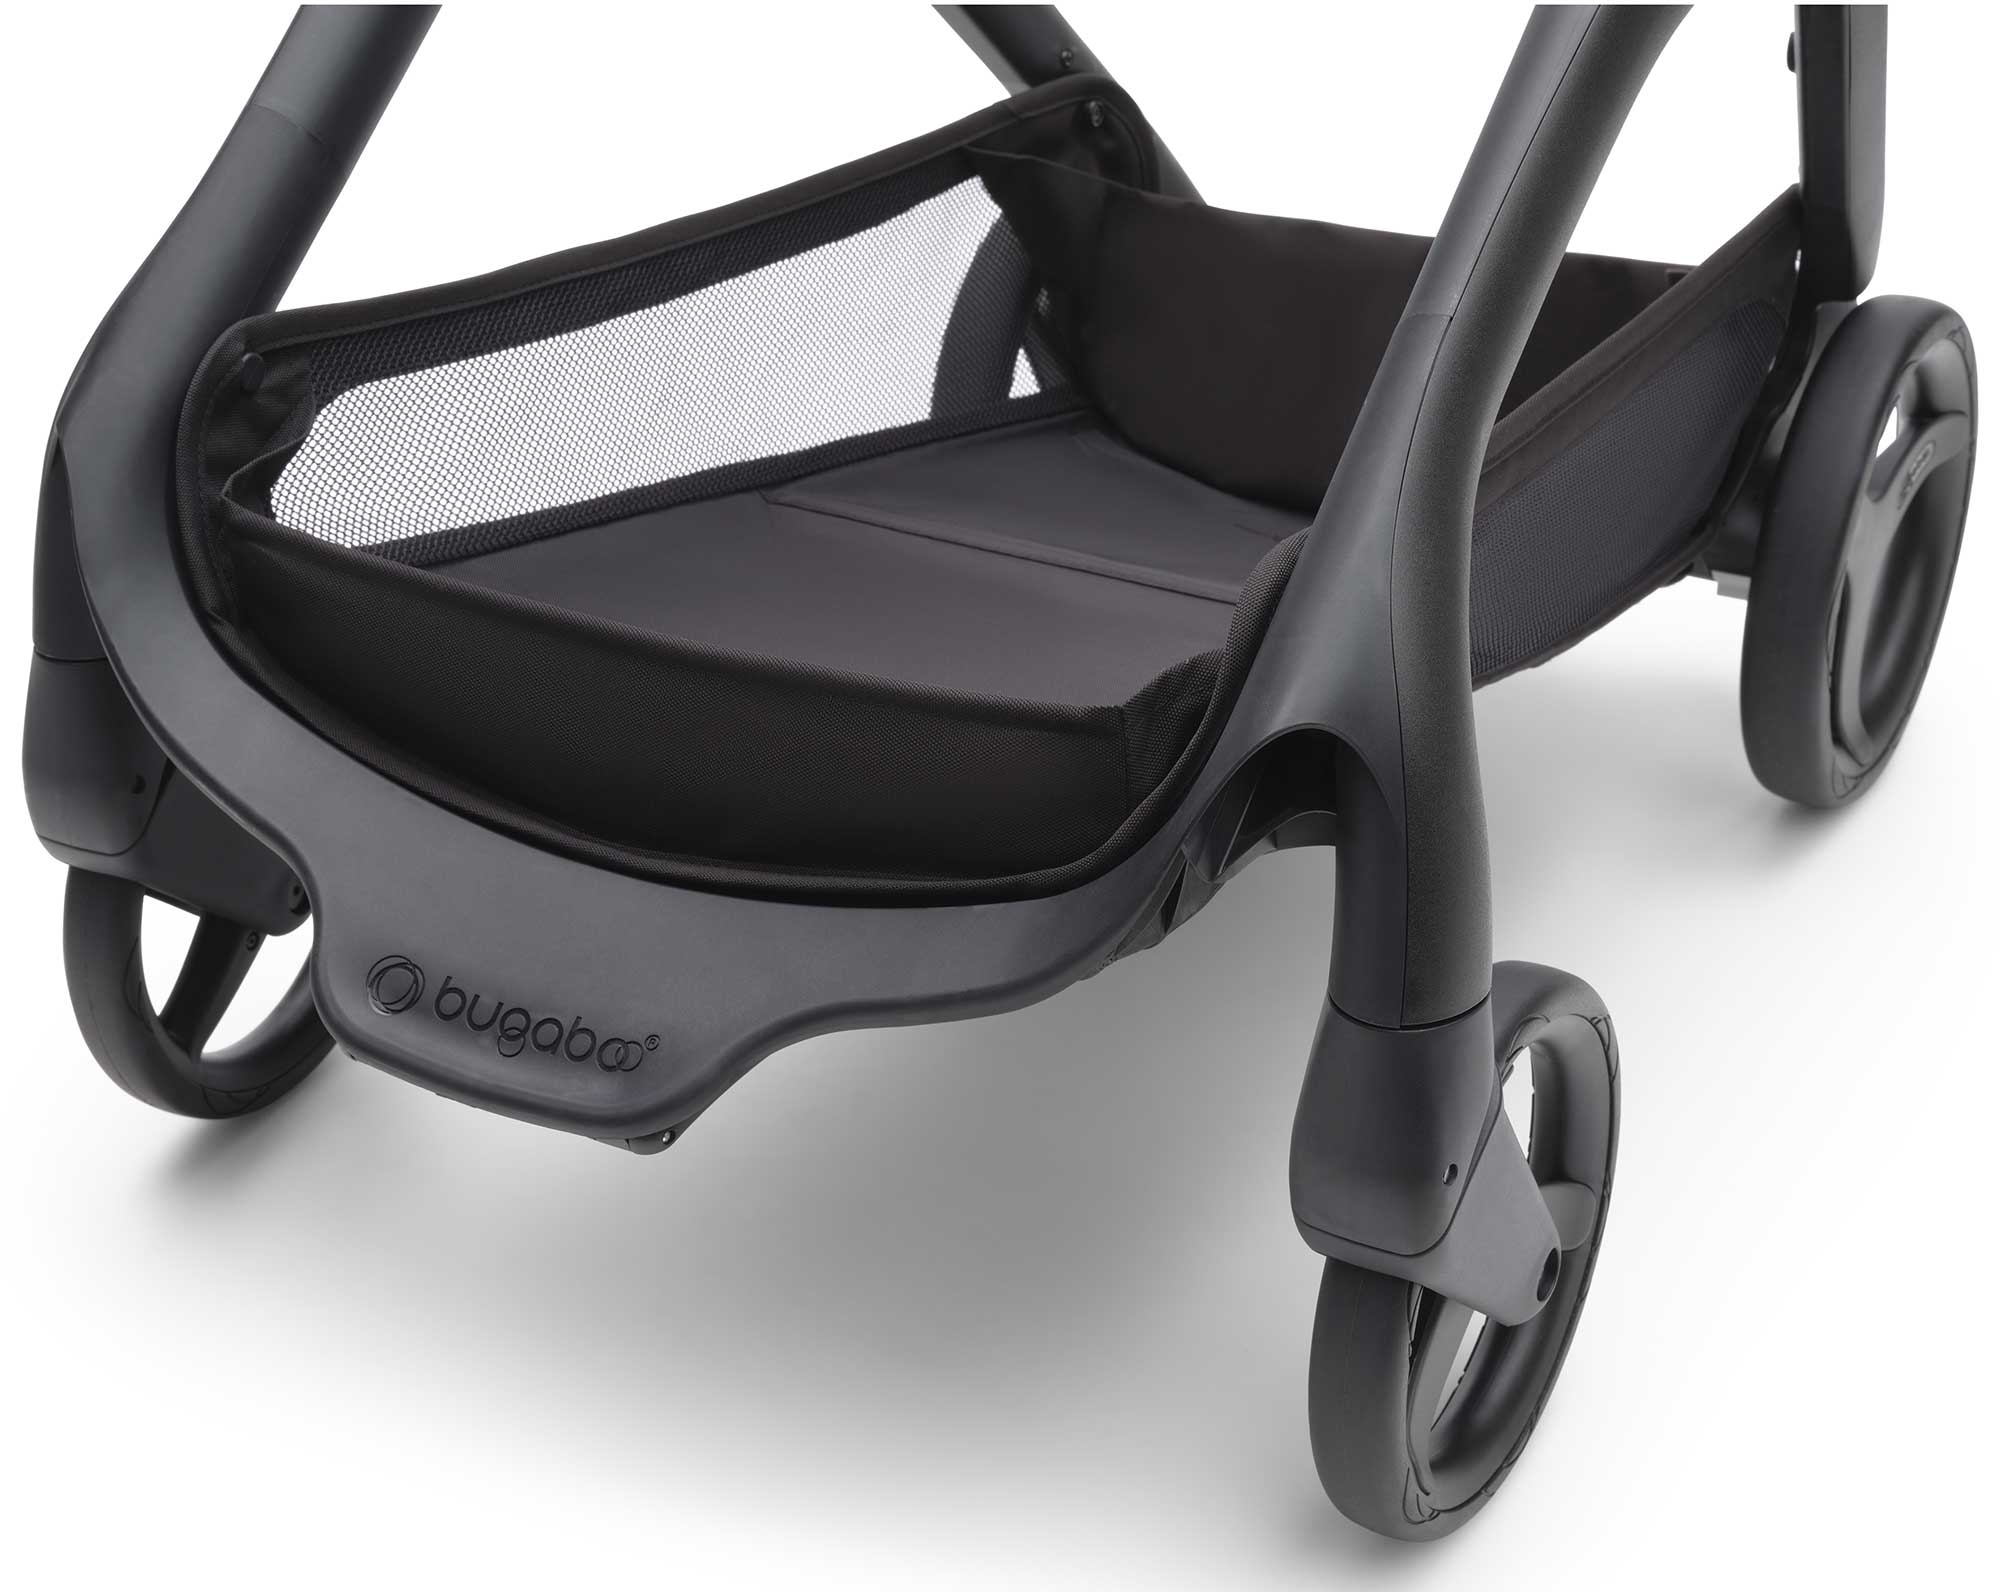 Bugaboo Pushchairs & Buggies Bugaboo Dragonfly Complete Pushchair in Graphite/Grey Melange 100176027